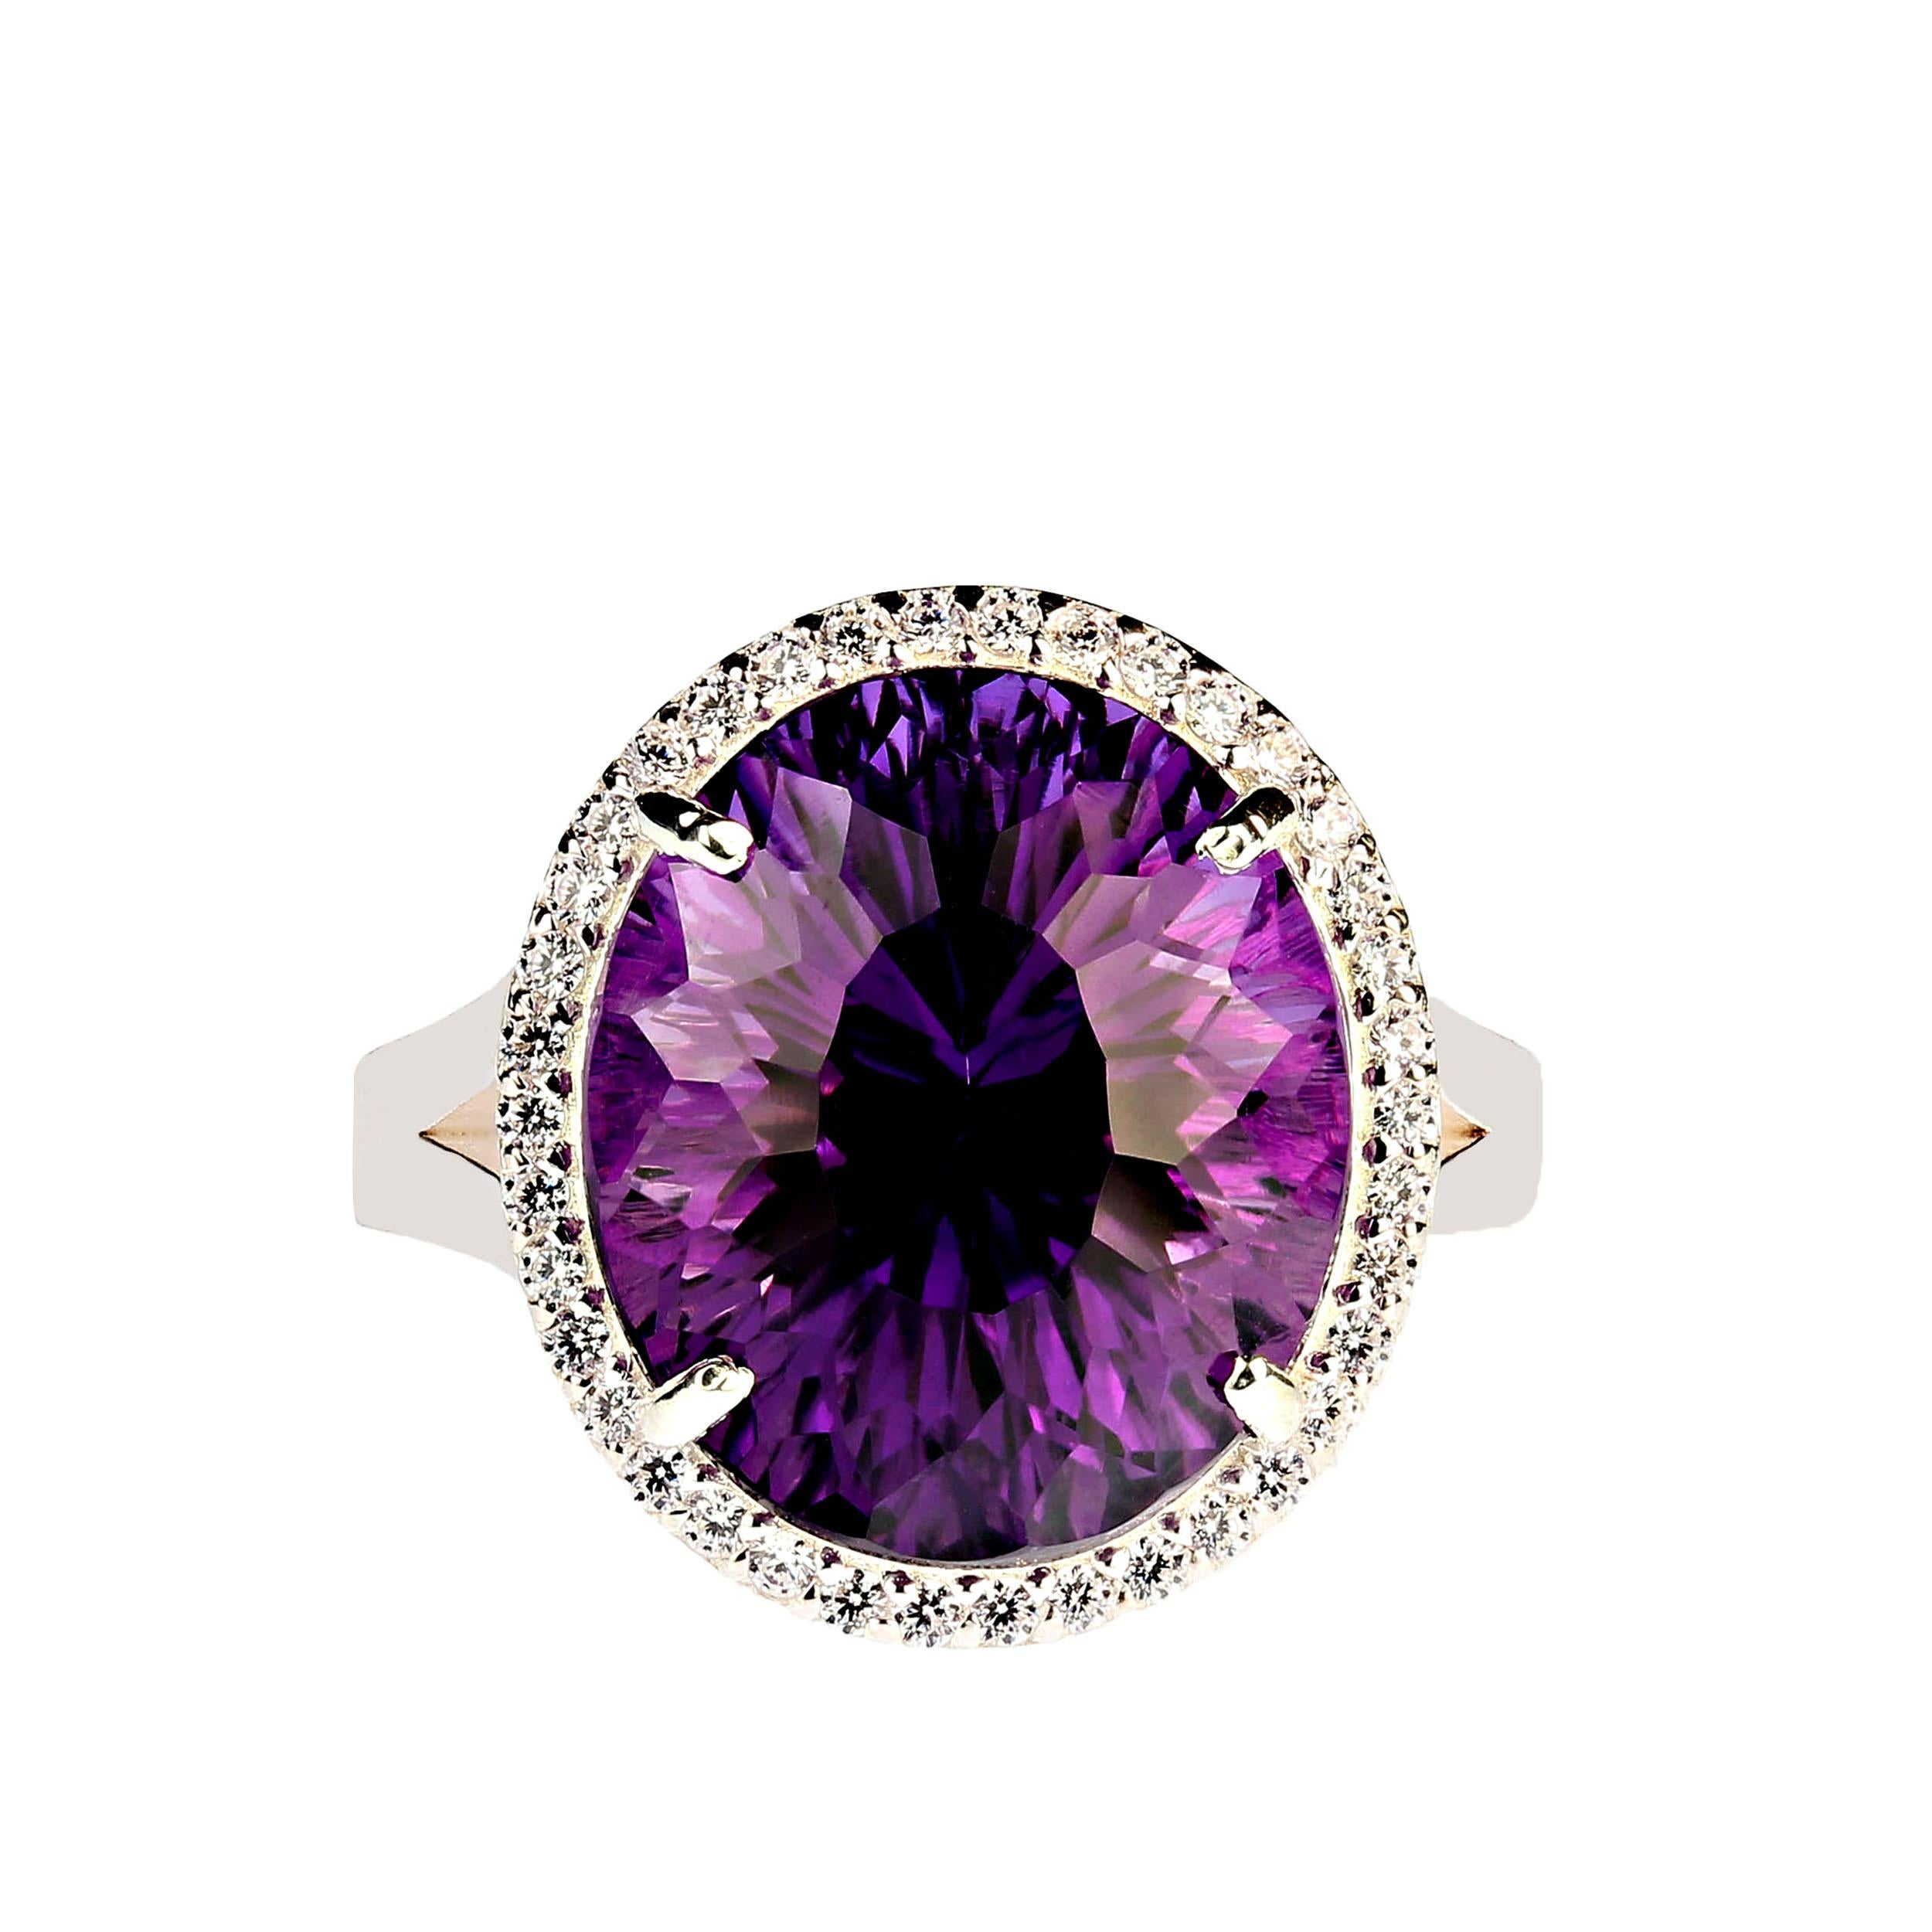 Women's or Men's AJD Elegant Cocktail Ring of Amethyst and Sparkling Zircons February Birthstone! For Sale